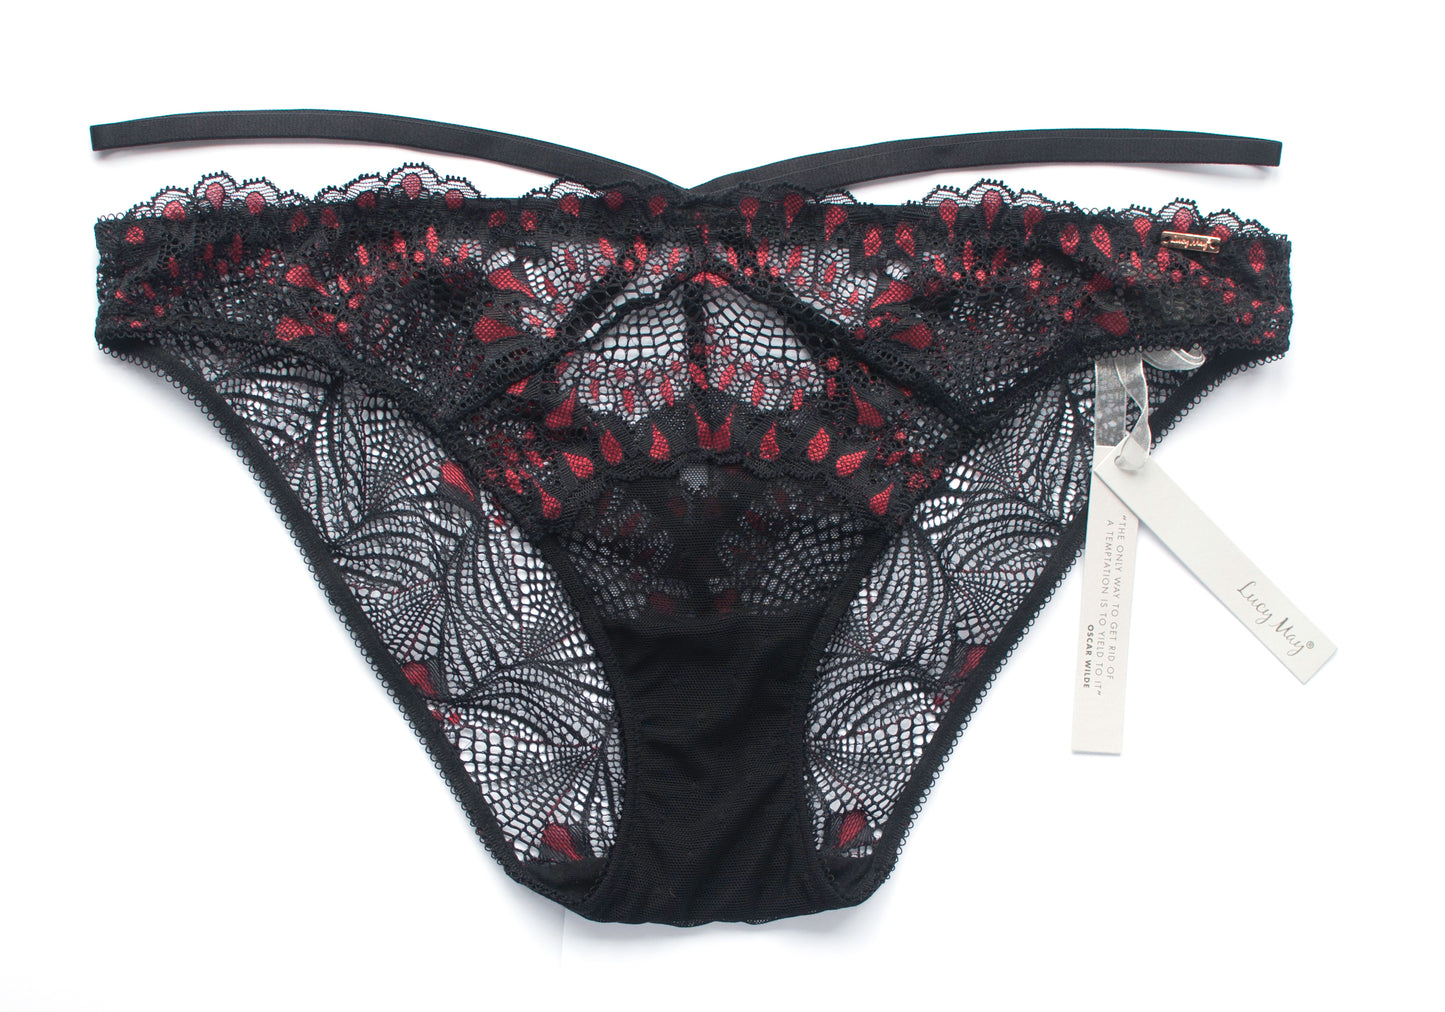 Black & red lace Lucy May Maybella Brief